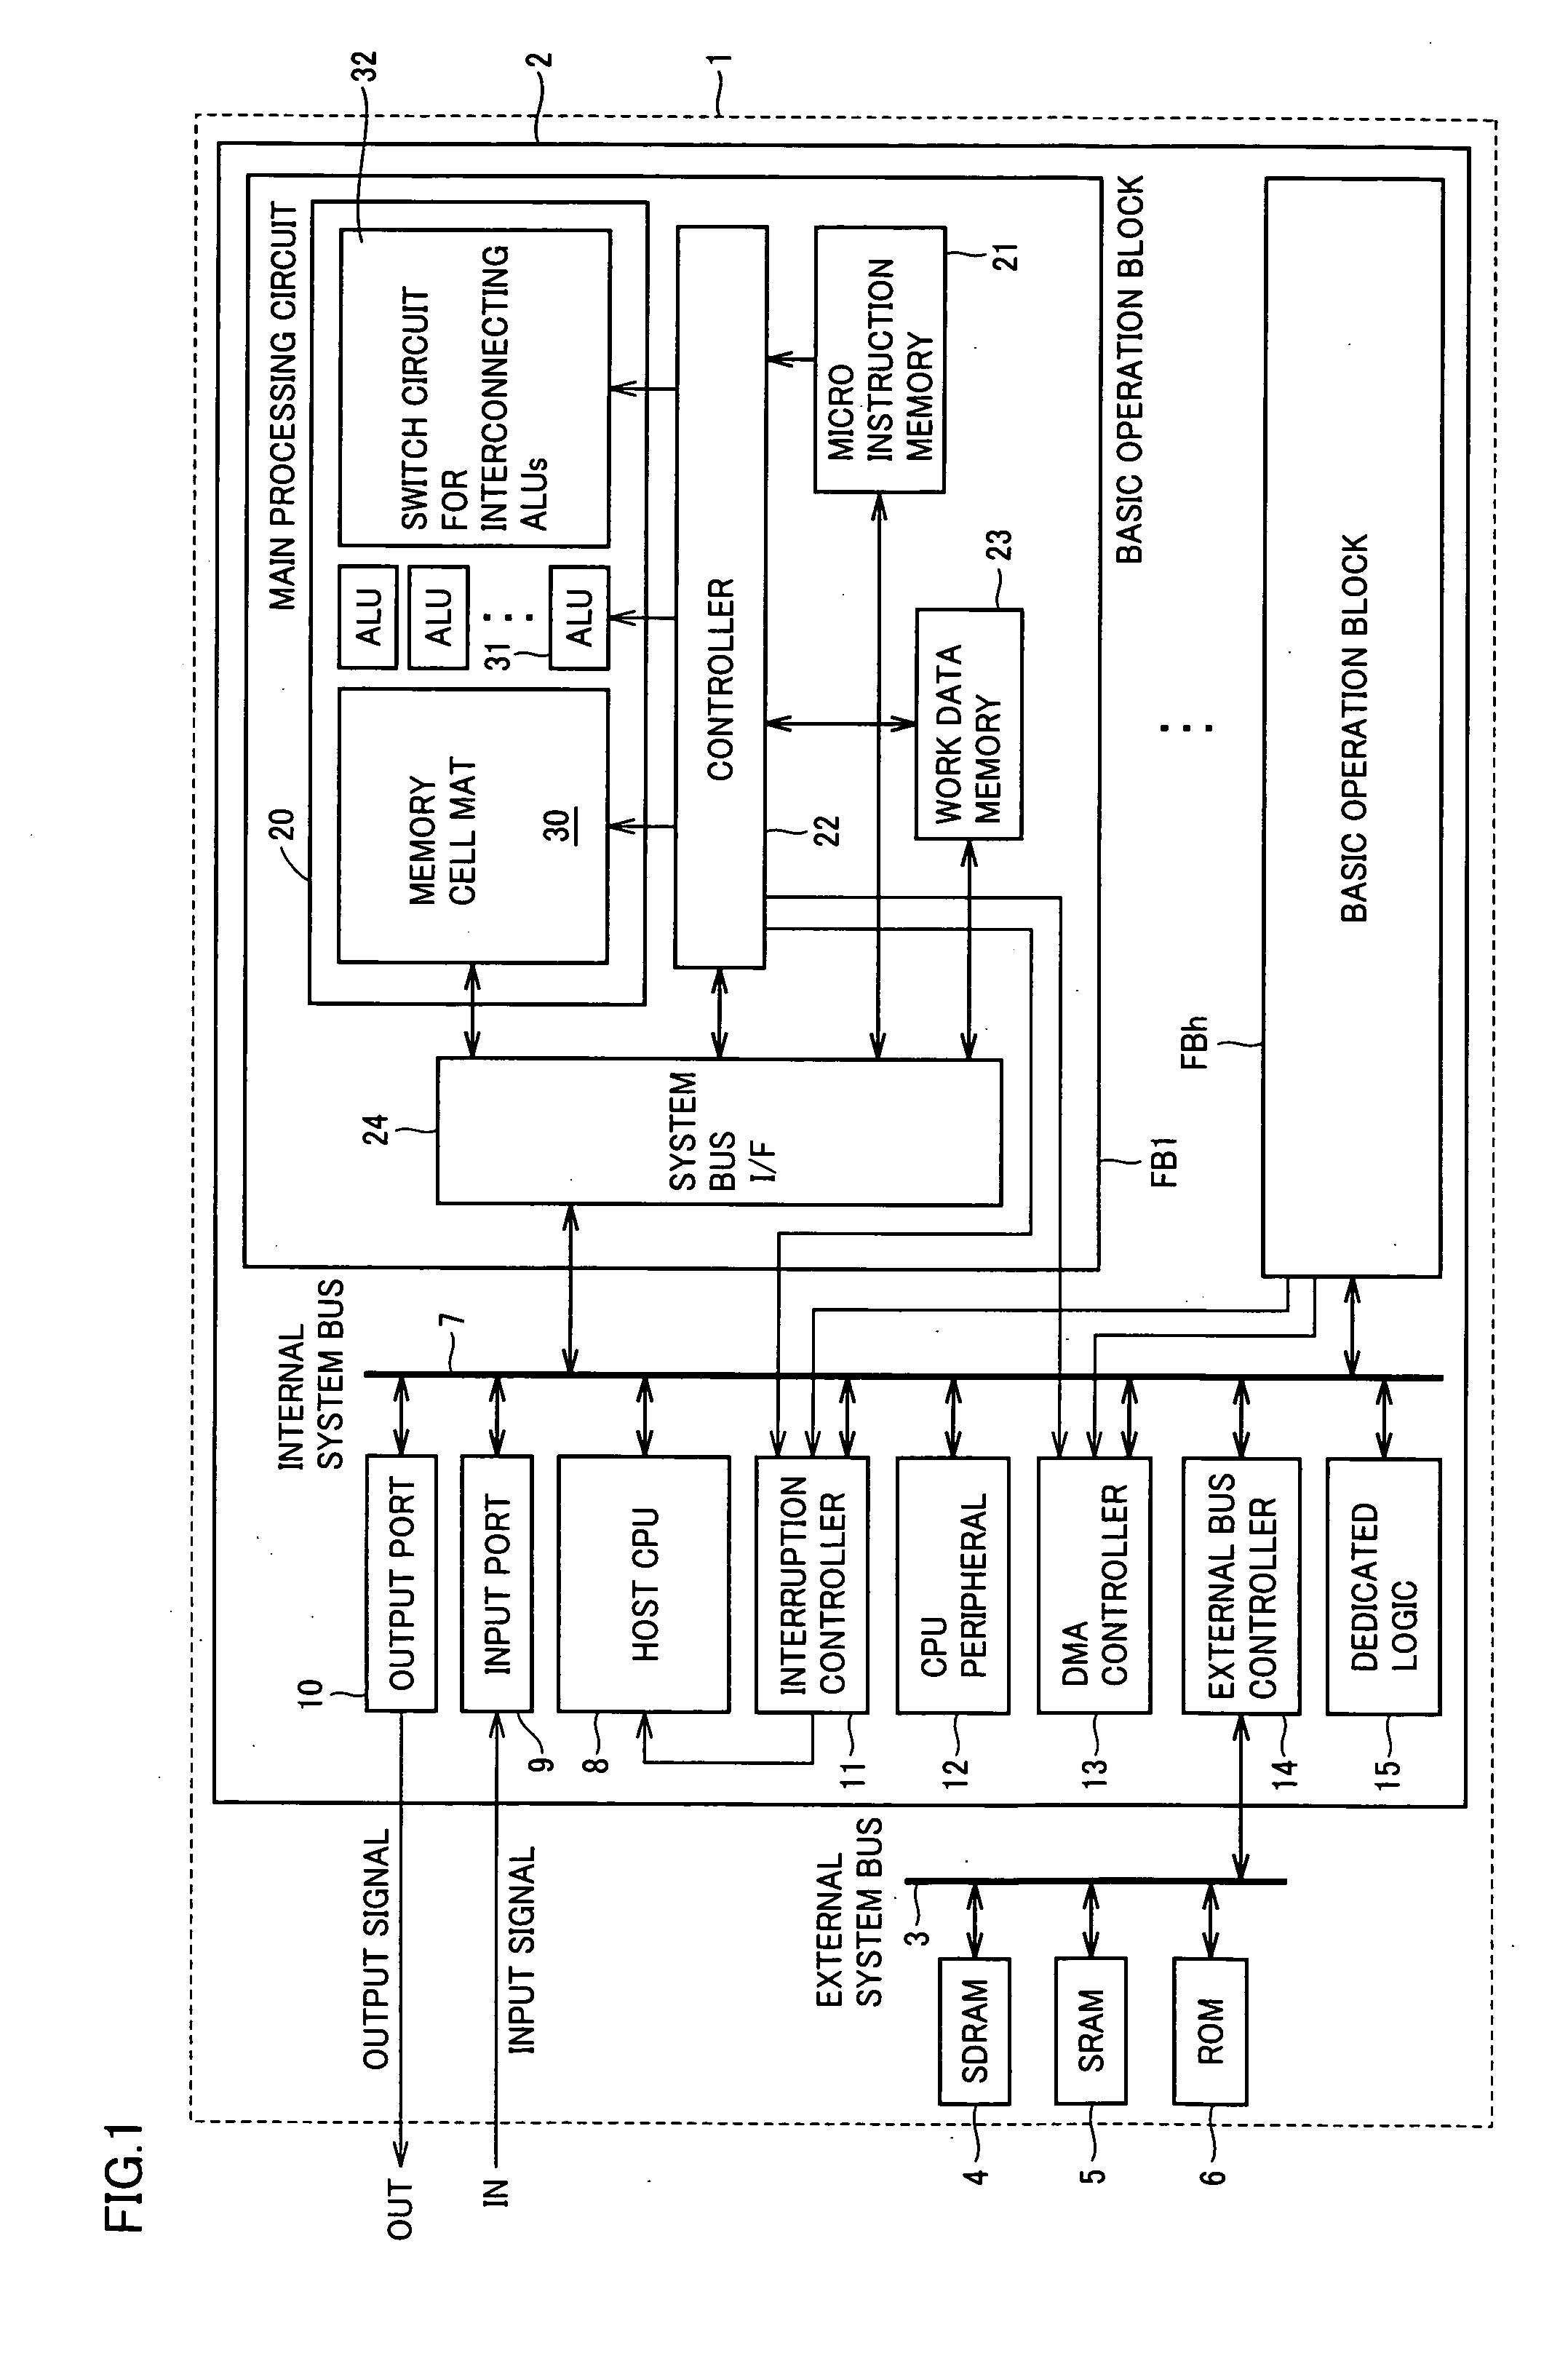 Semiconductor signal processing device